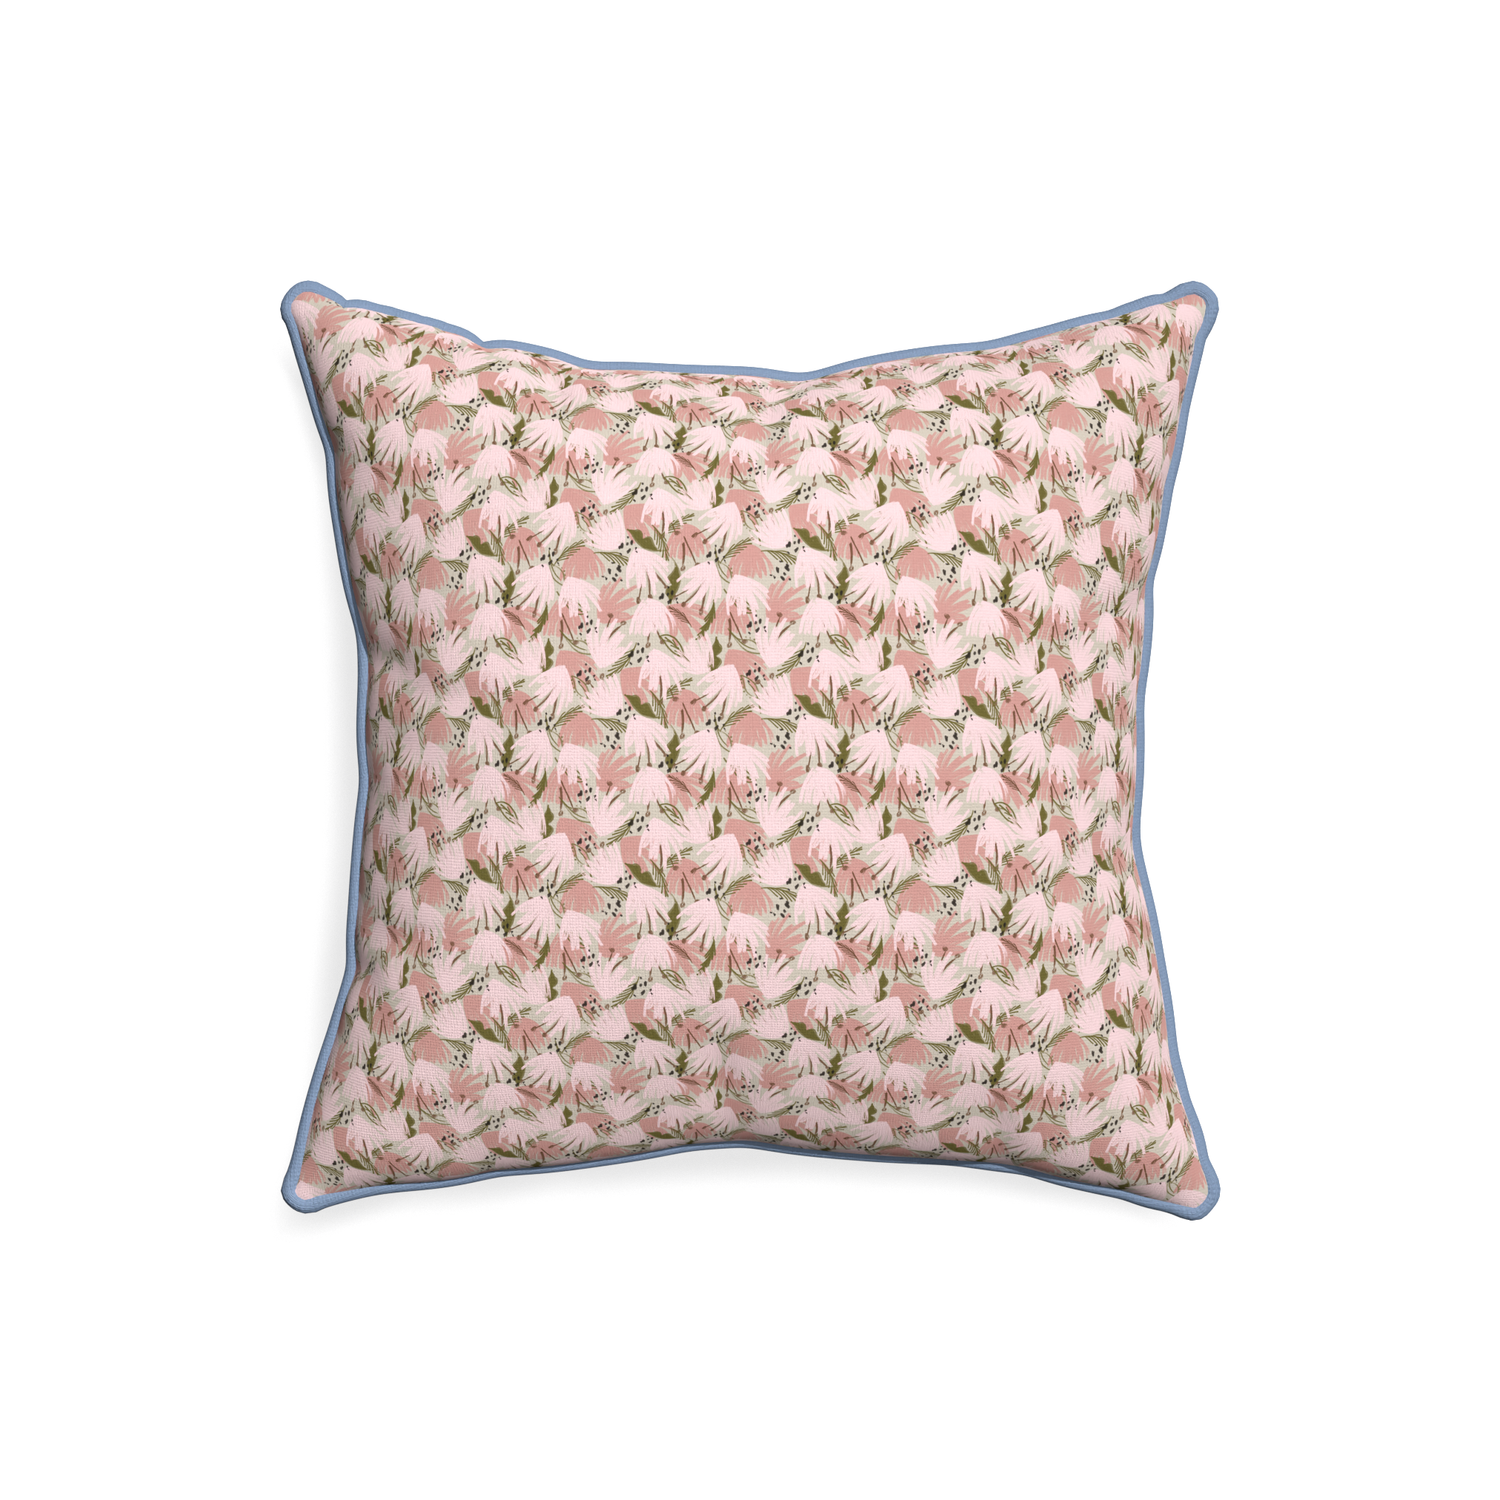 20-square eden pink custom pink floralpillow with sky piping on white background